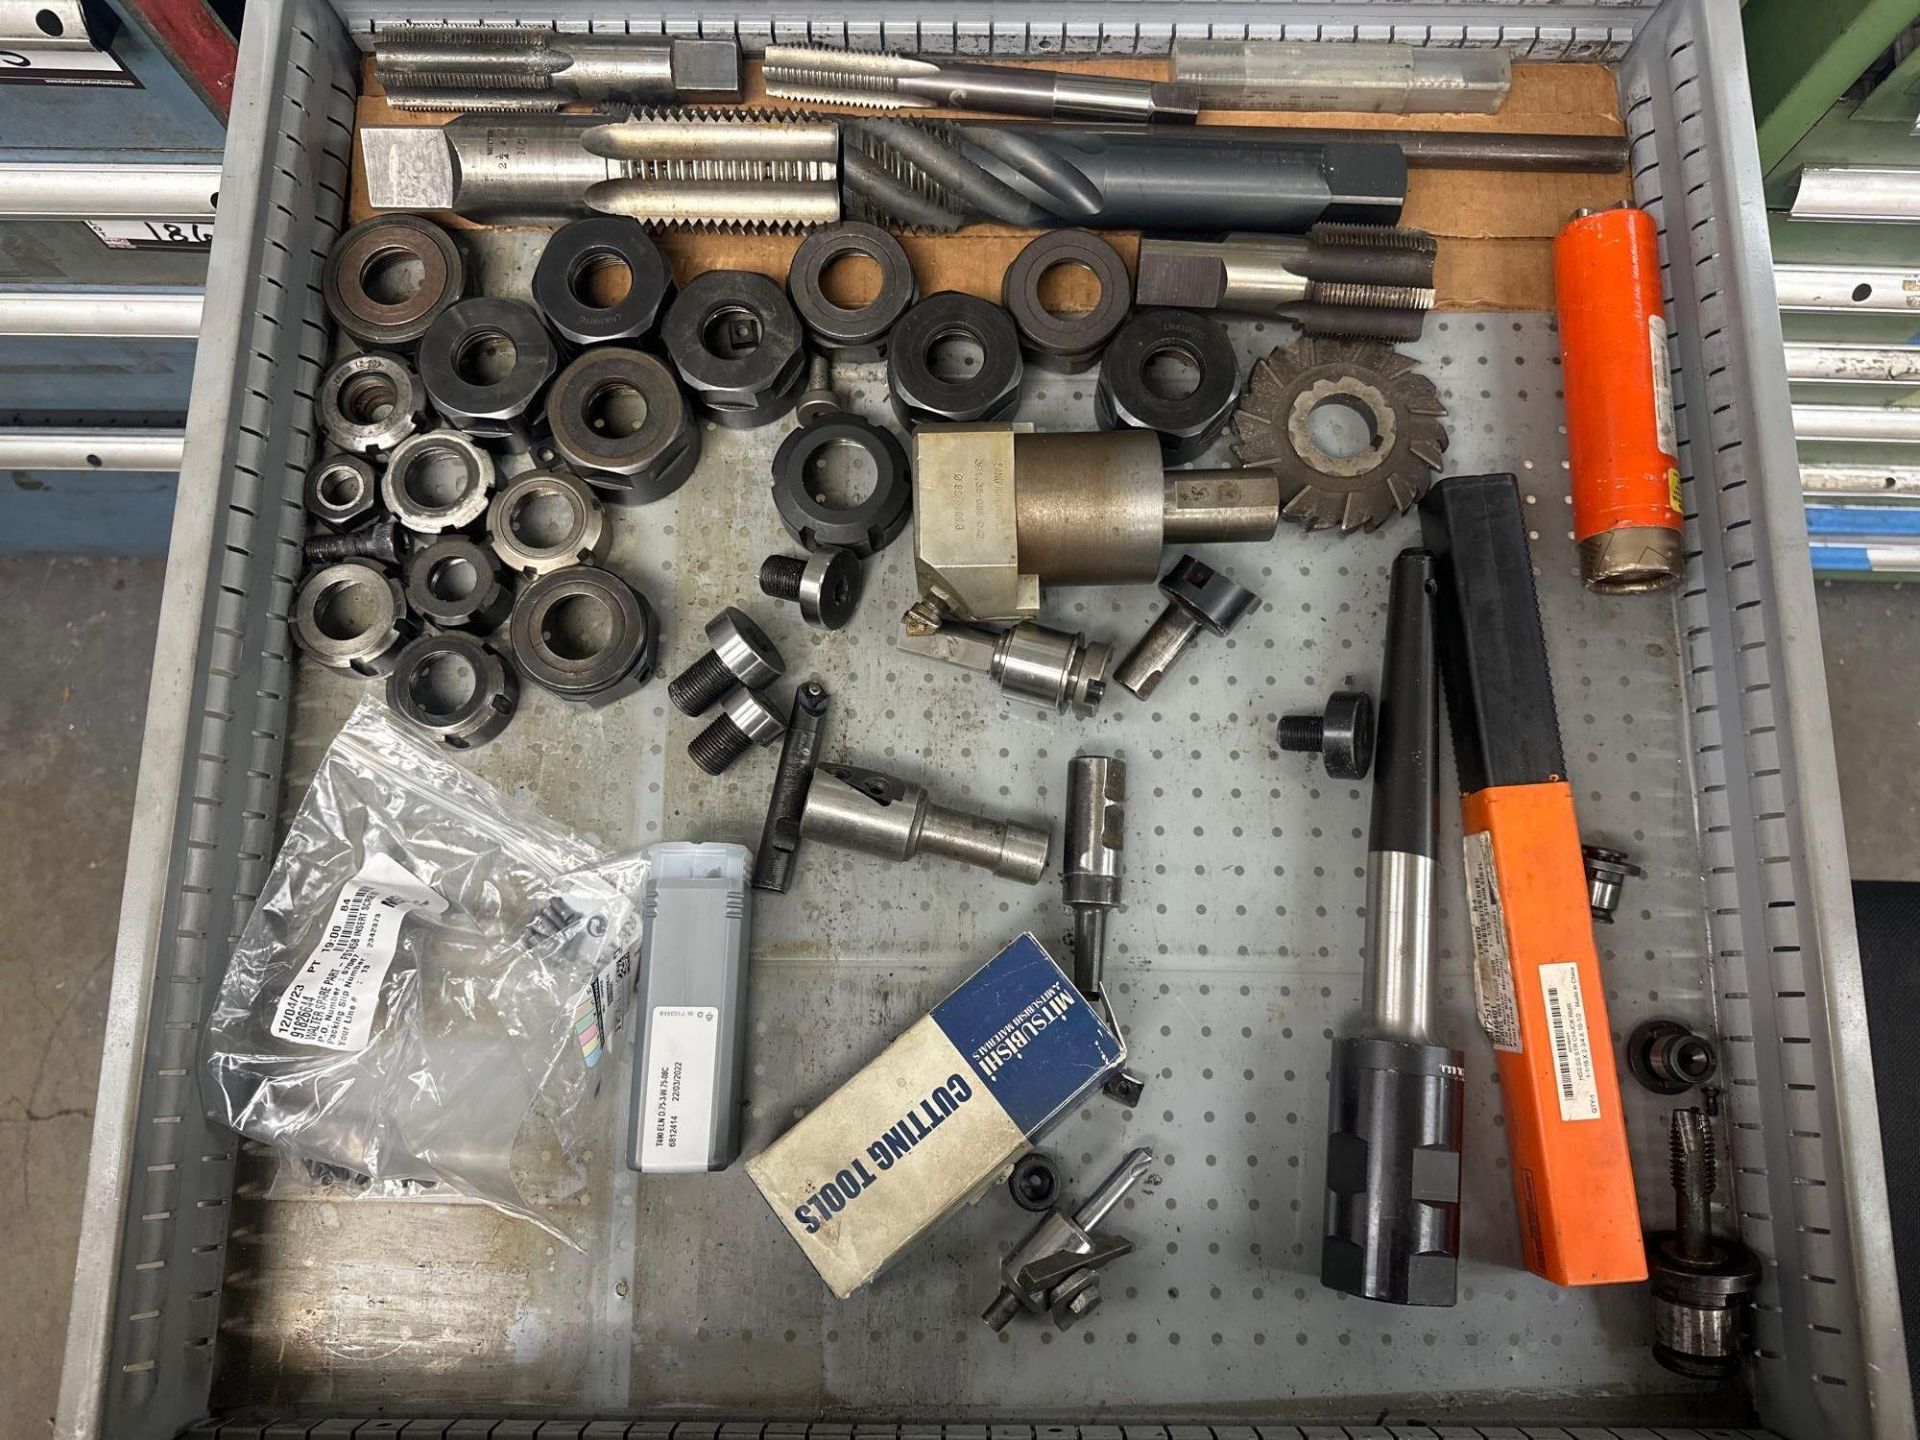 Assorted Tapping Endmills, Fasteners, and Face Mill